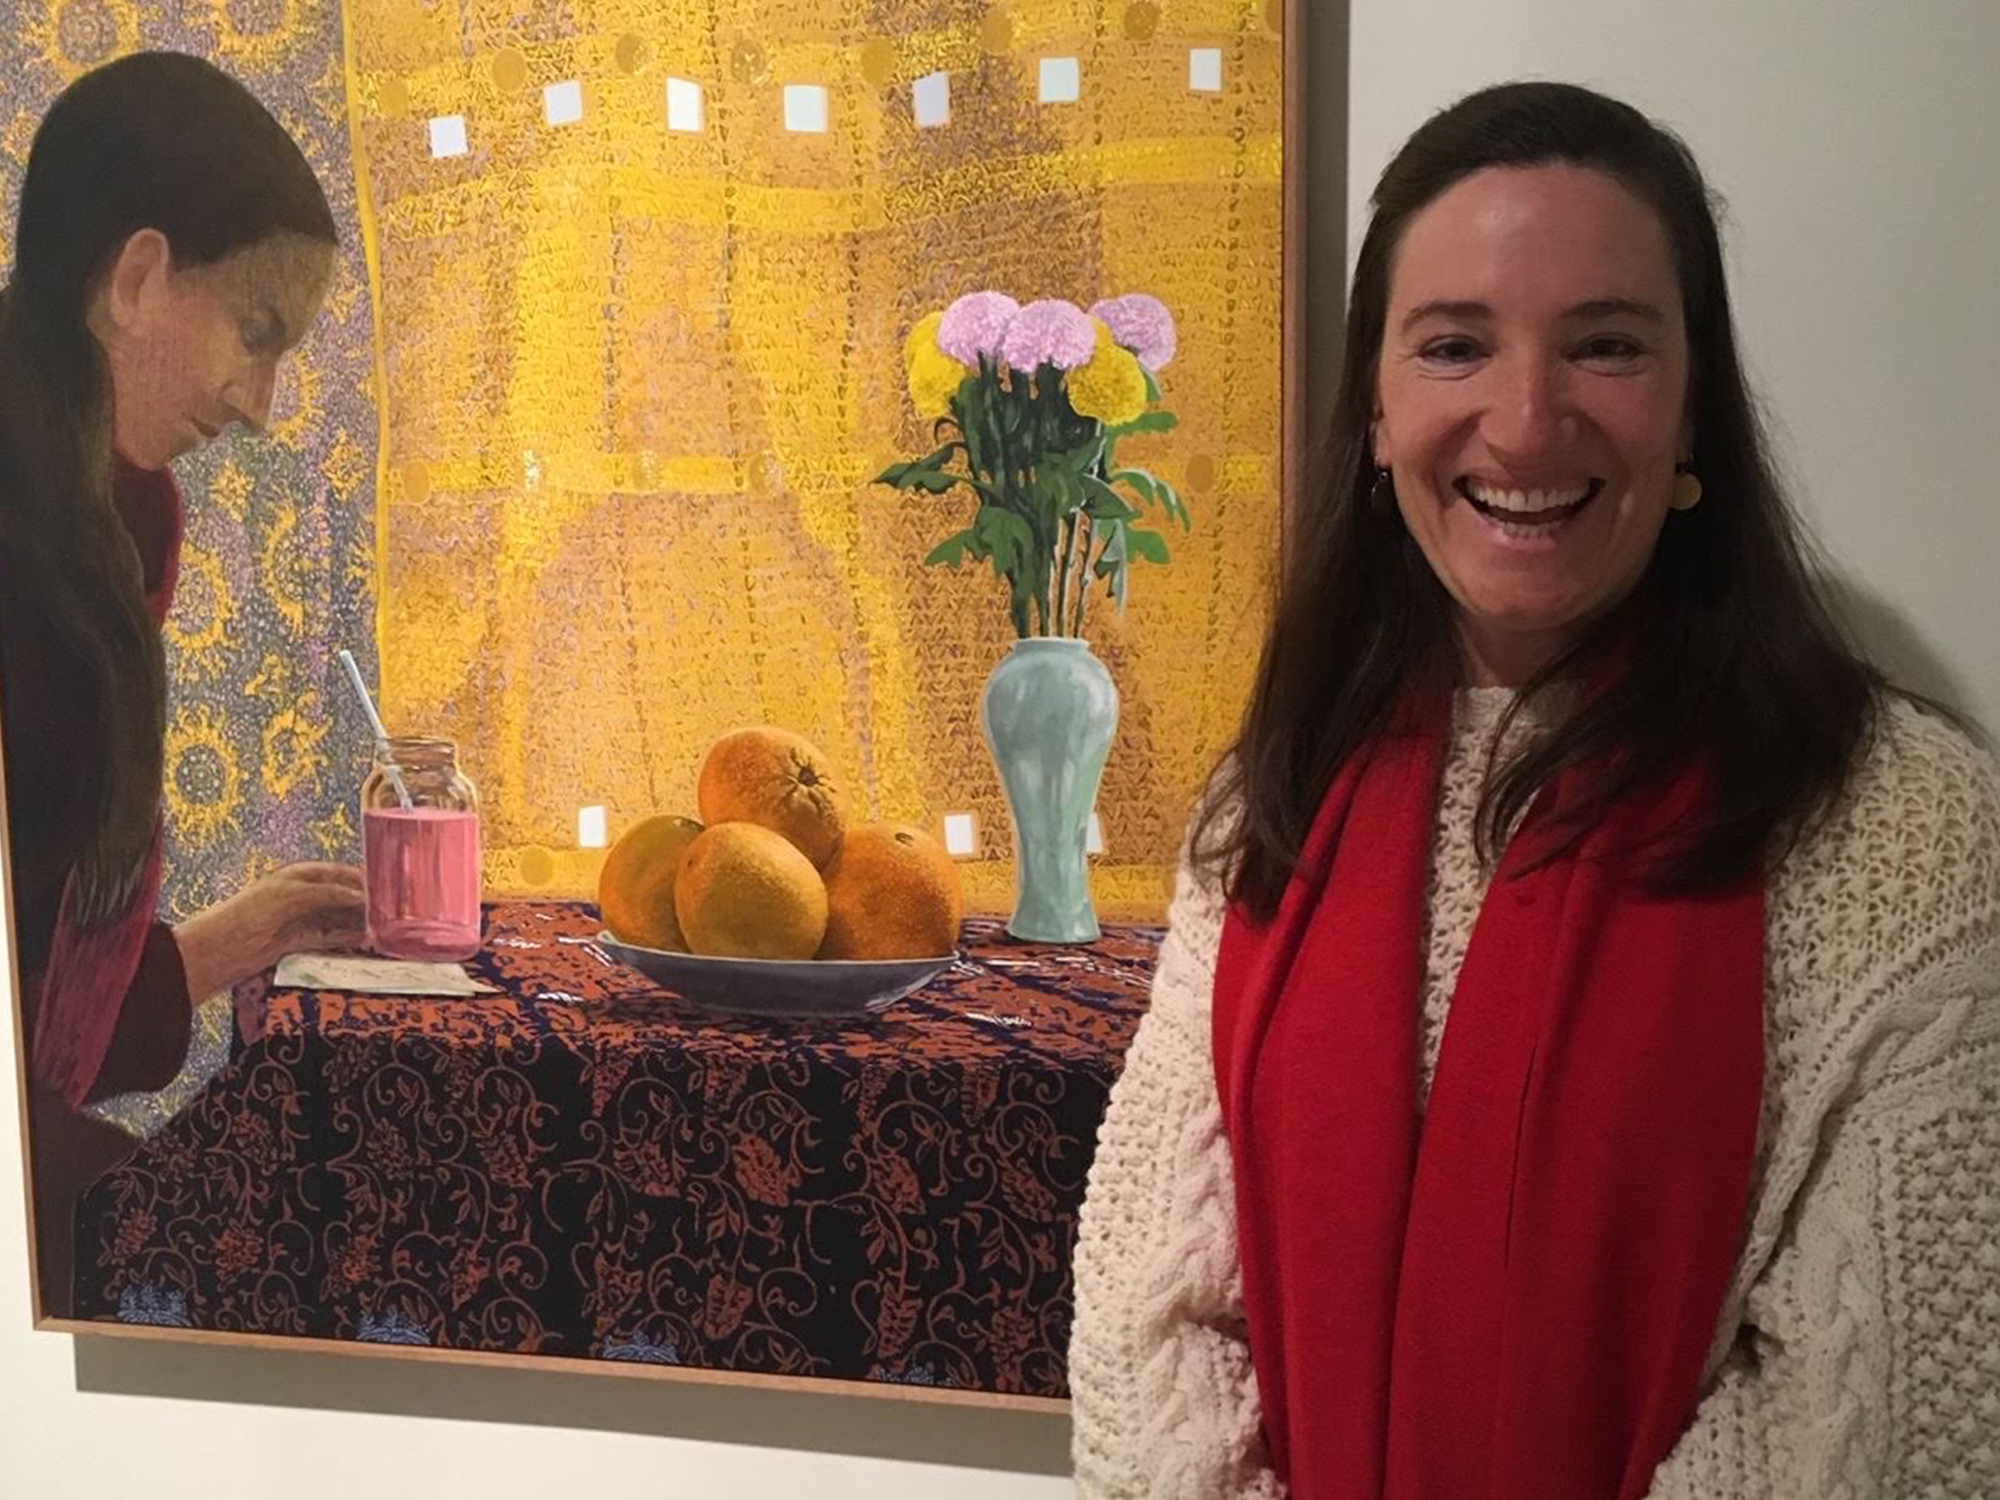 A woman with long brown hair and a big smile wearing a white knit jumper and a red scarf. She is standing infront of a painting featuring a woman sitting at a table. There is a plate of oranges and a blue vase of pink roses on the table.